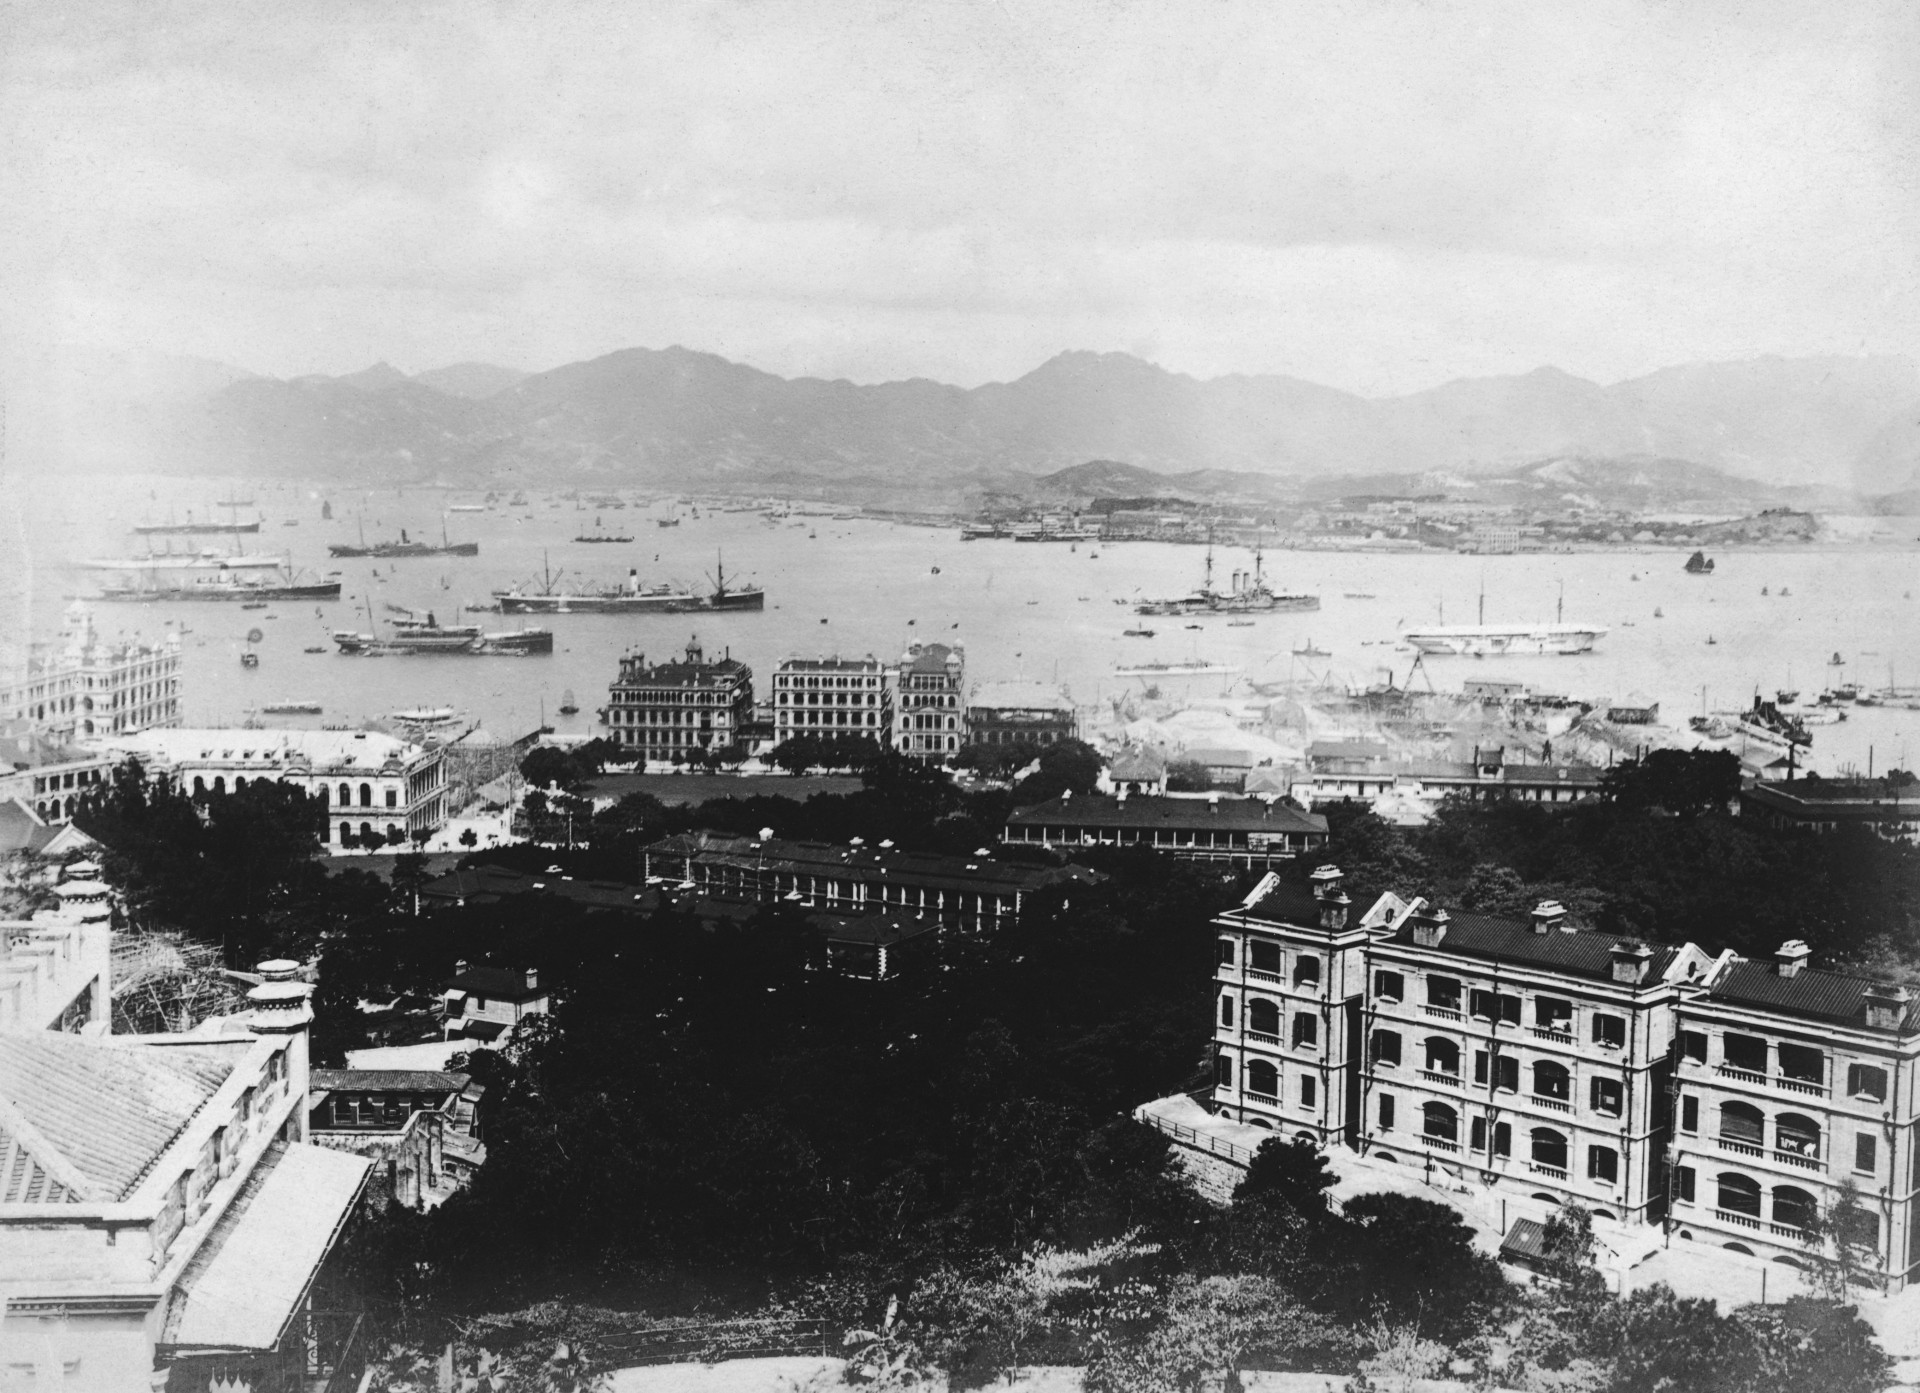 The port city of Hong Kong in 1910.<p><a href="https://www.msn.com/en-us/community/channel/vid-7xx8mnucu55yw63we9va2gwr7uihbxwc68fxqp25x6tg4ftibpra?cvid=94631541bc0f4f89bfd59158d696ad7e">Follow us and access great exclusive content every day</a></p>